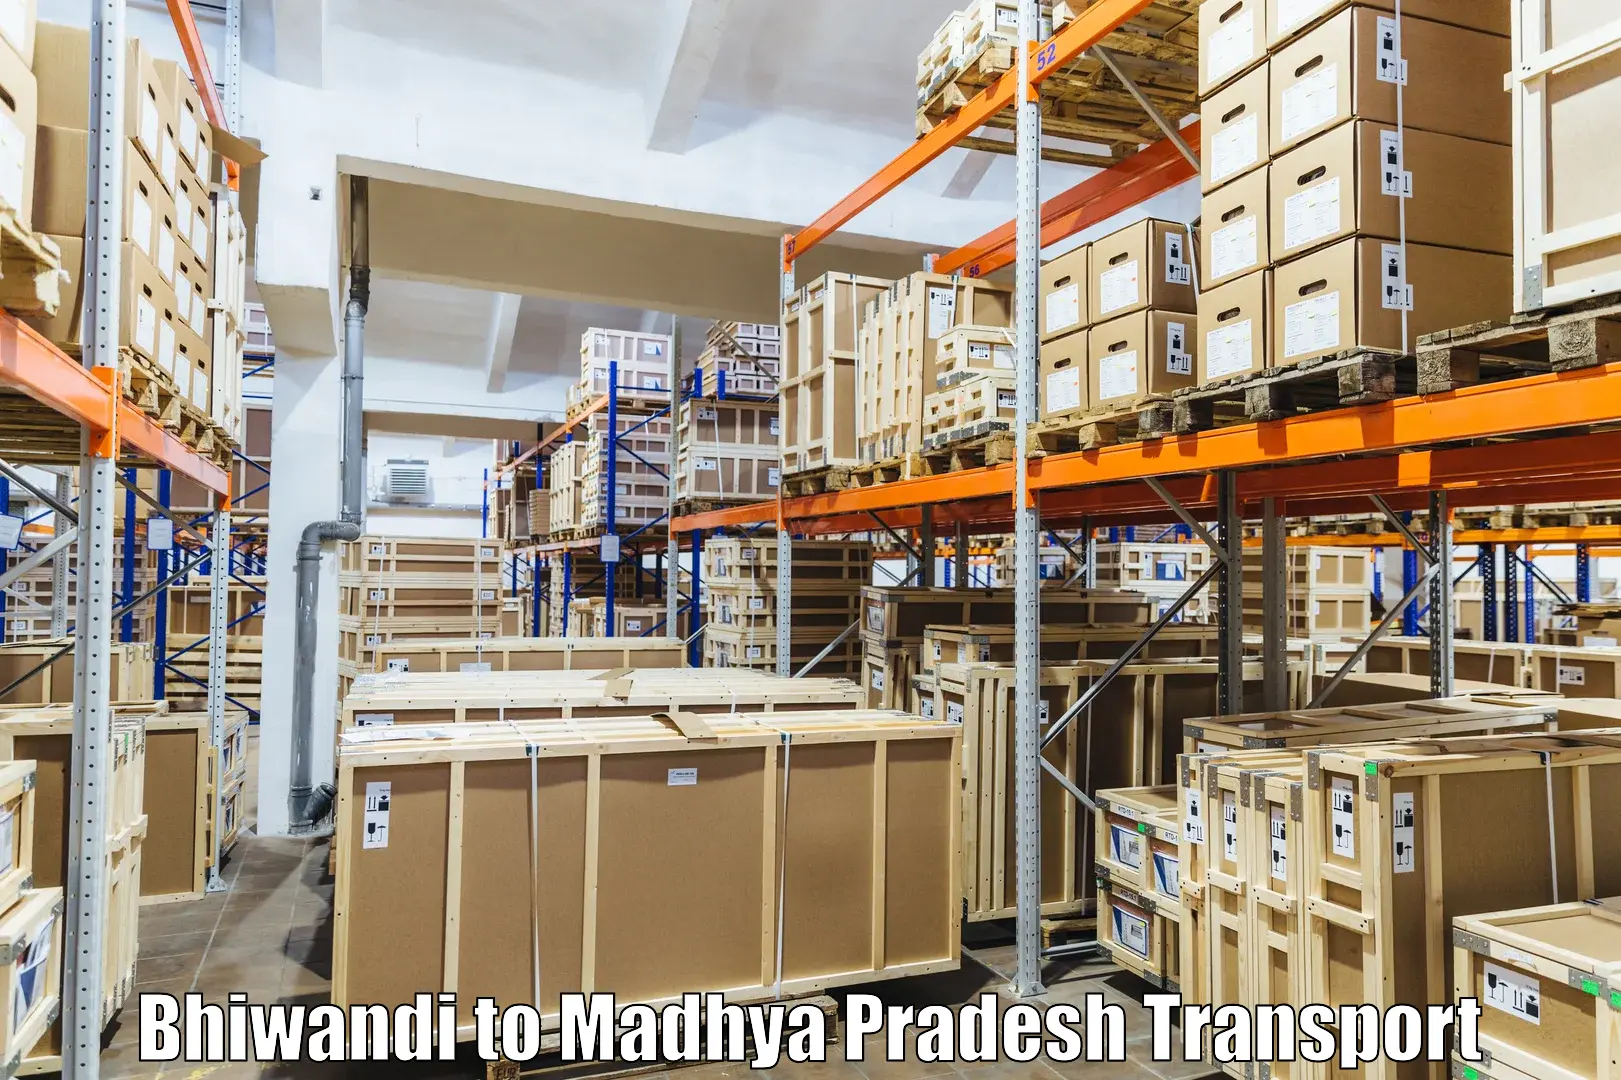 Daily parcel service transport in Bhiwandi to Seoni